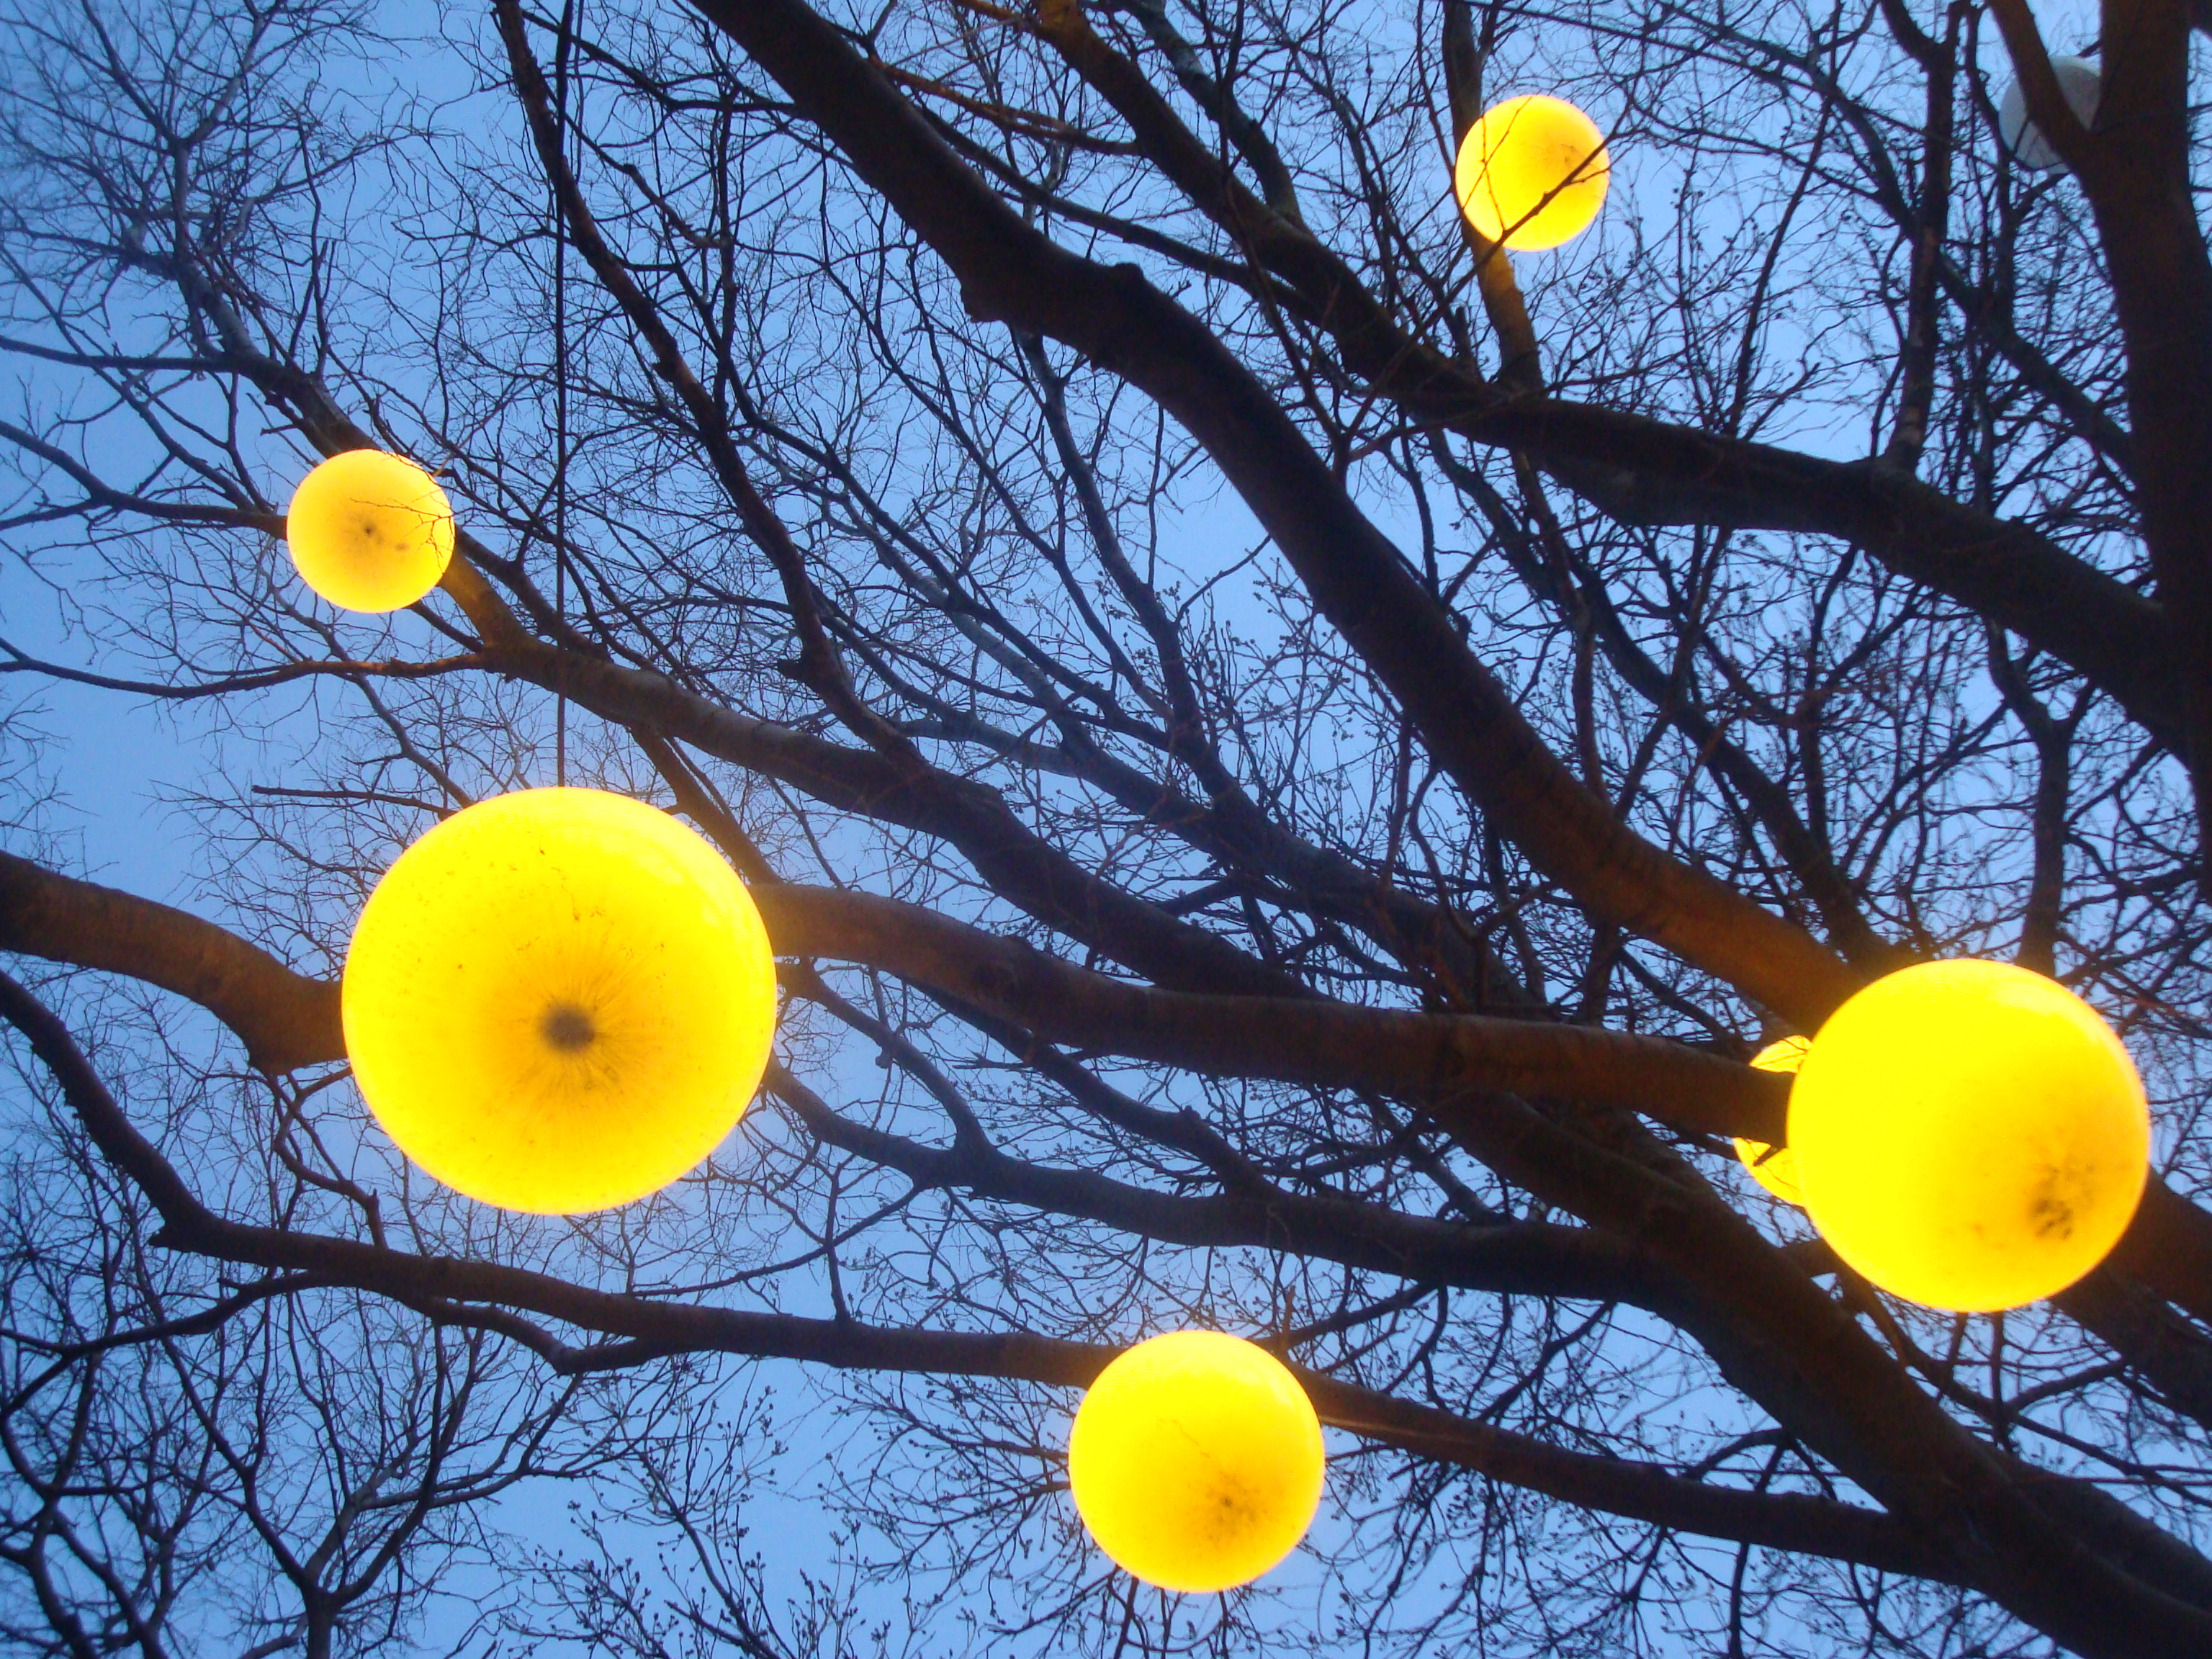 Lamps on a tree photo